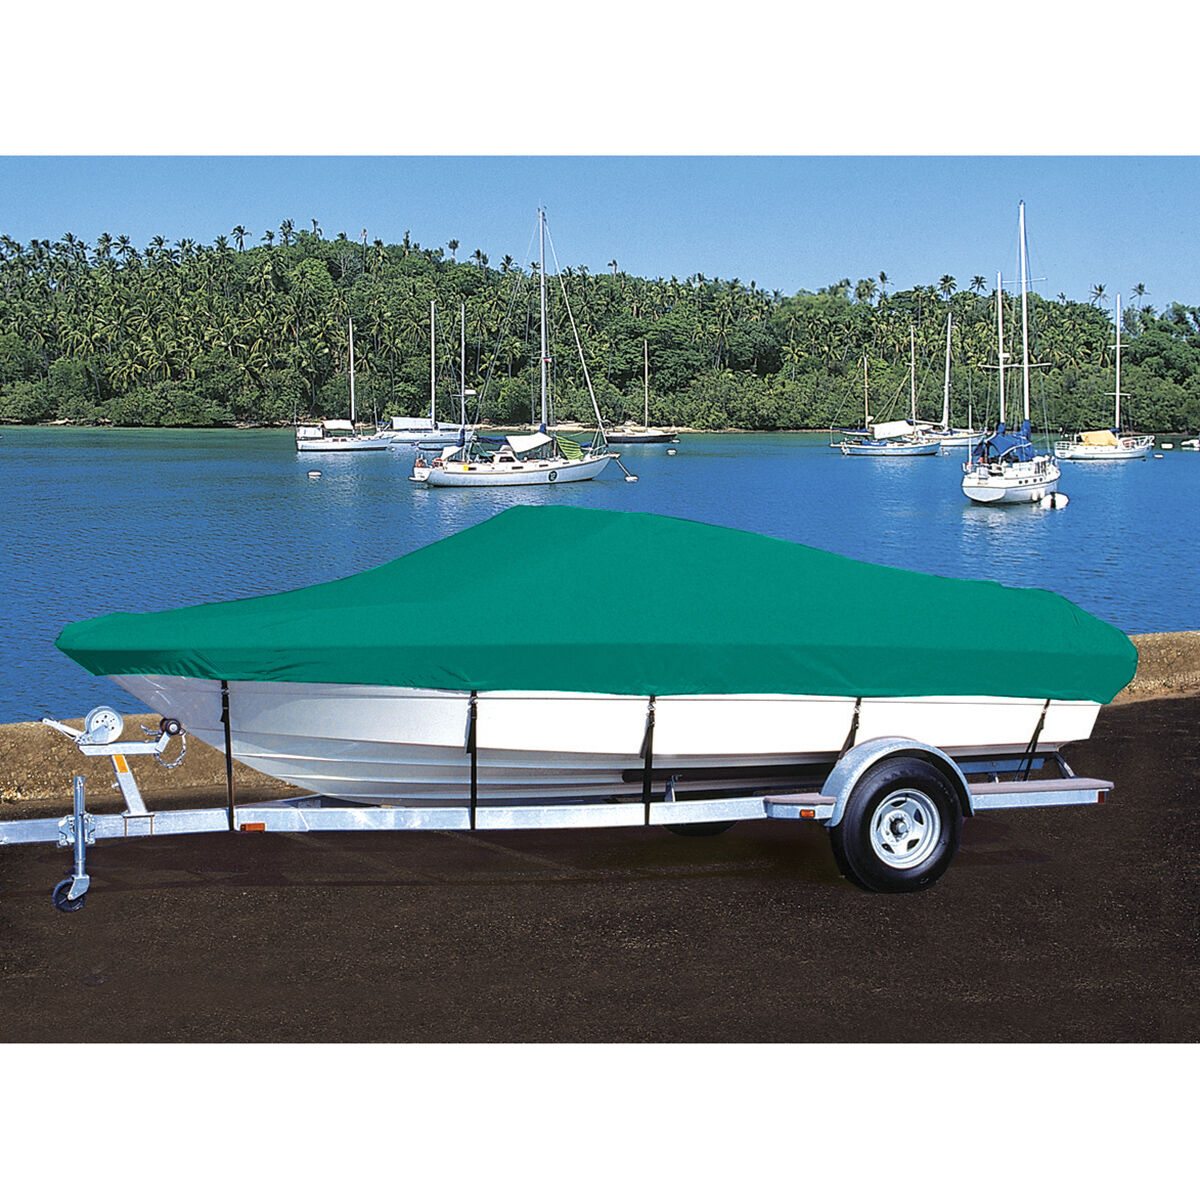 Taylor Made Trailerite Hot Shot Cover for 07-08 Skeeter ZX225 DC/PTM/OB Boat Cover in Teal Polyester